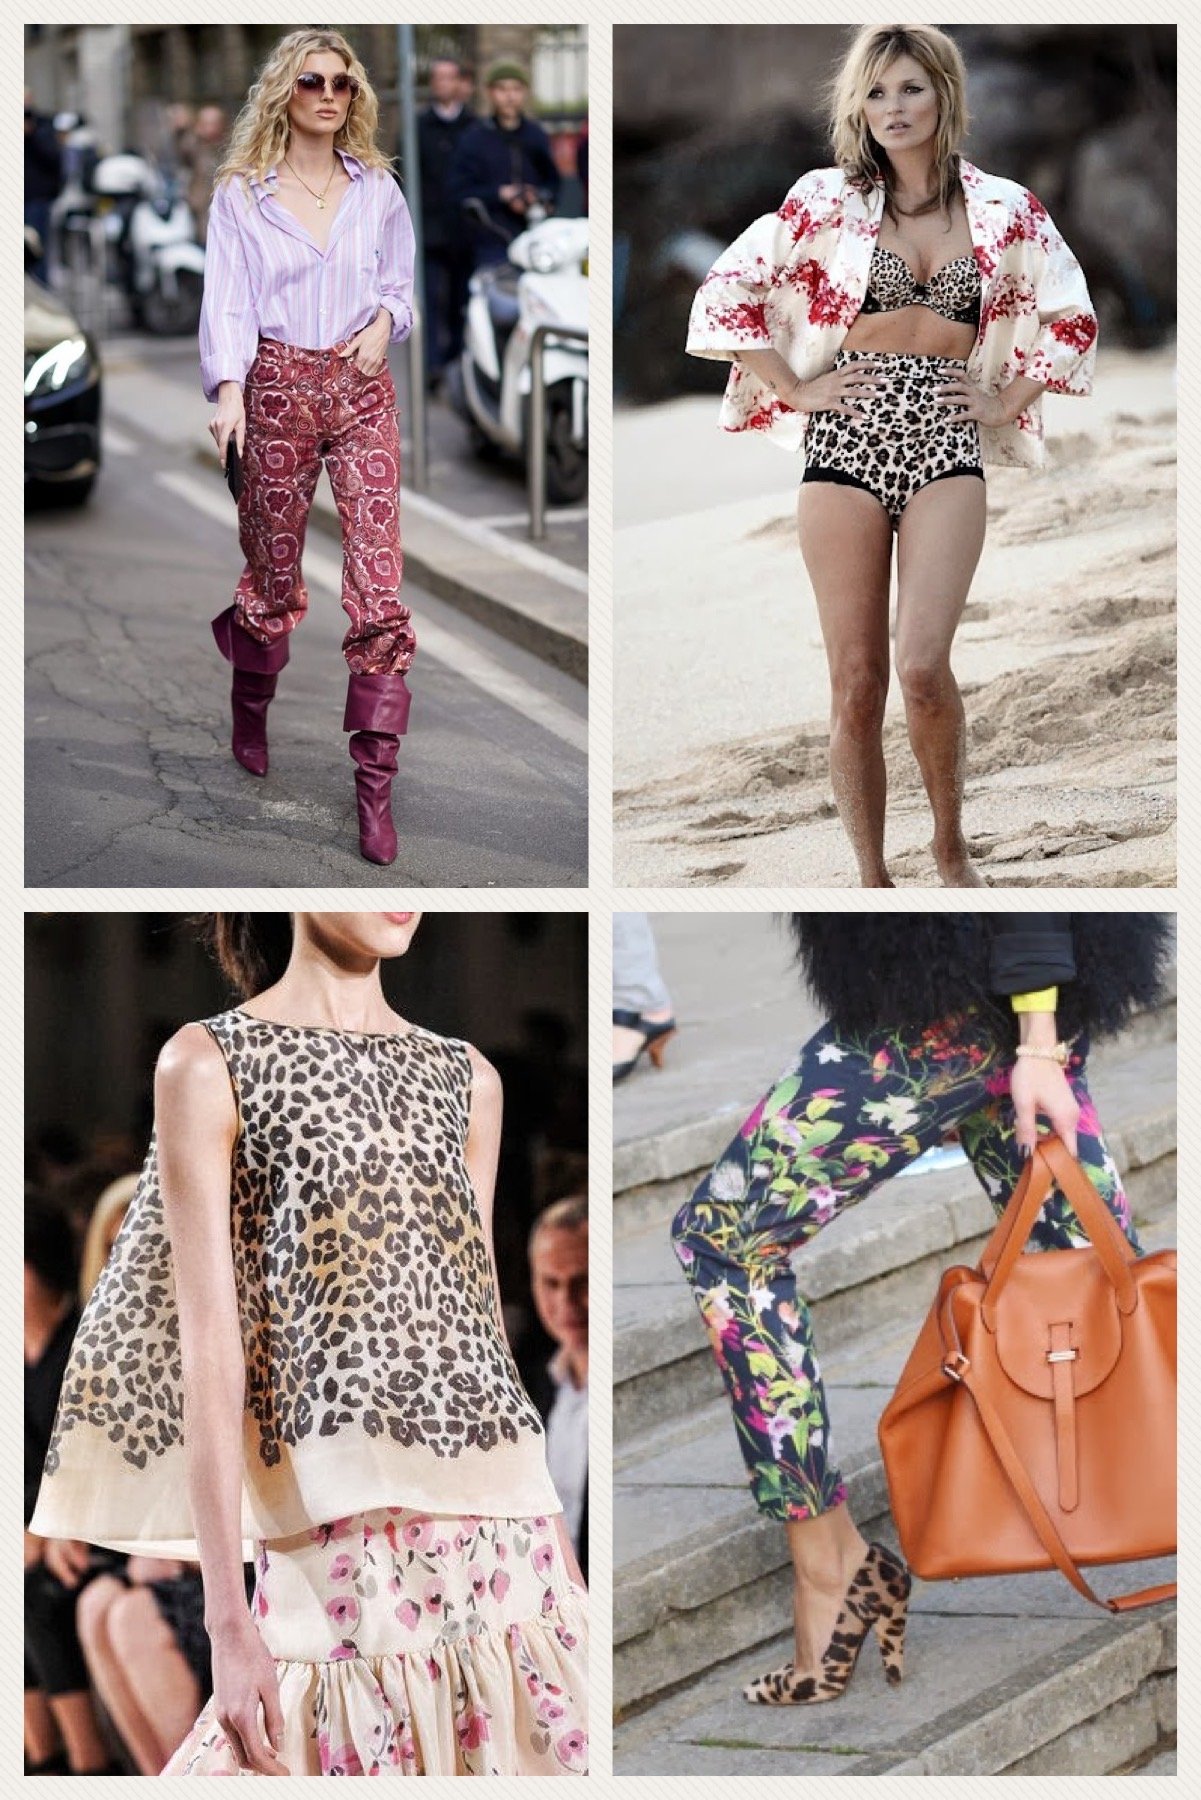 Simple Modern: New leopard print styles are here!